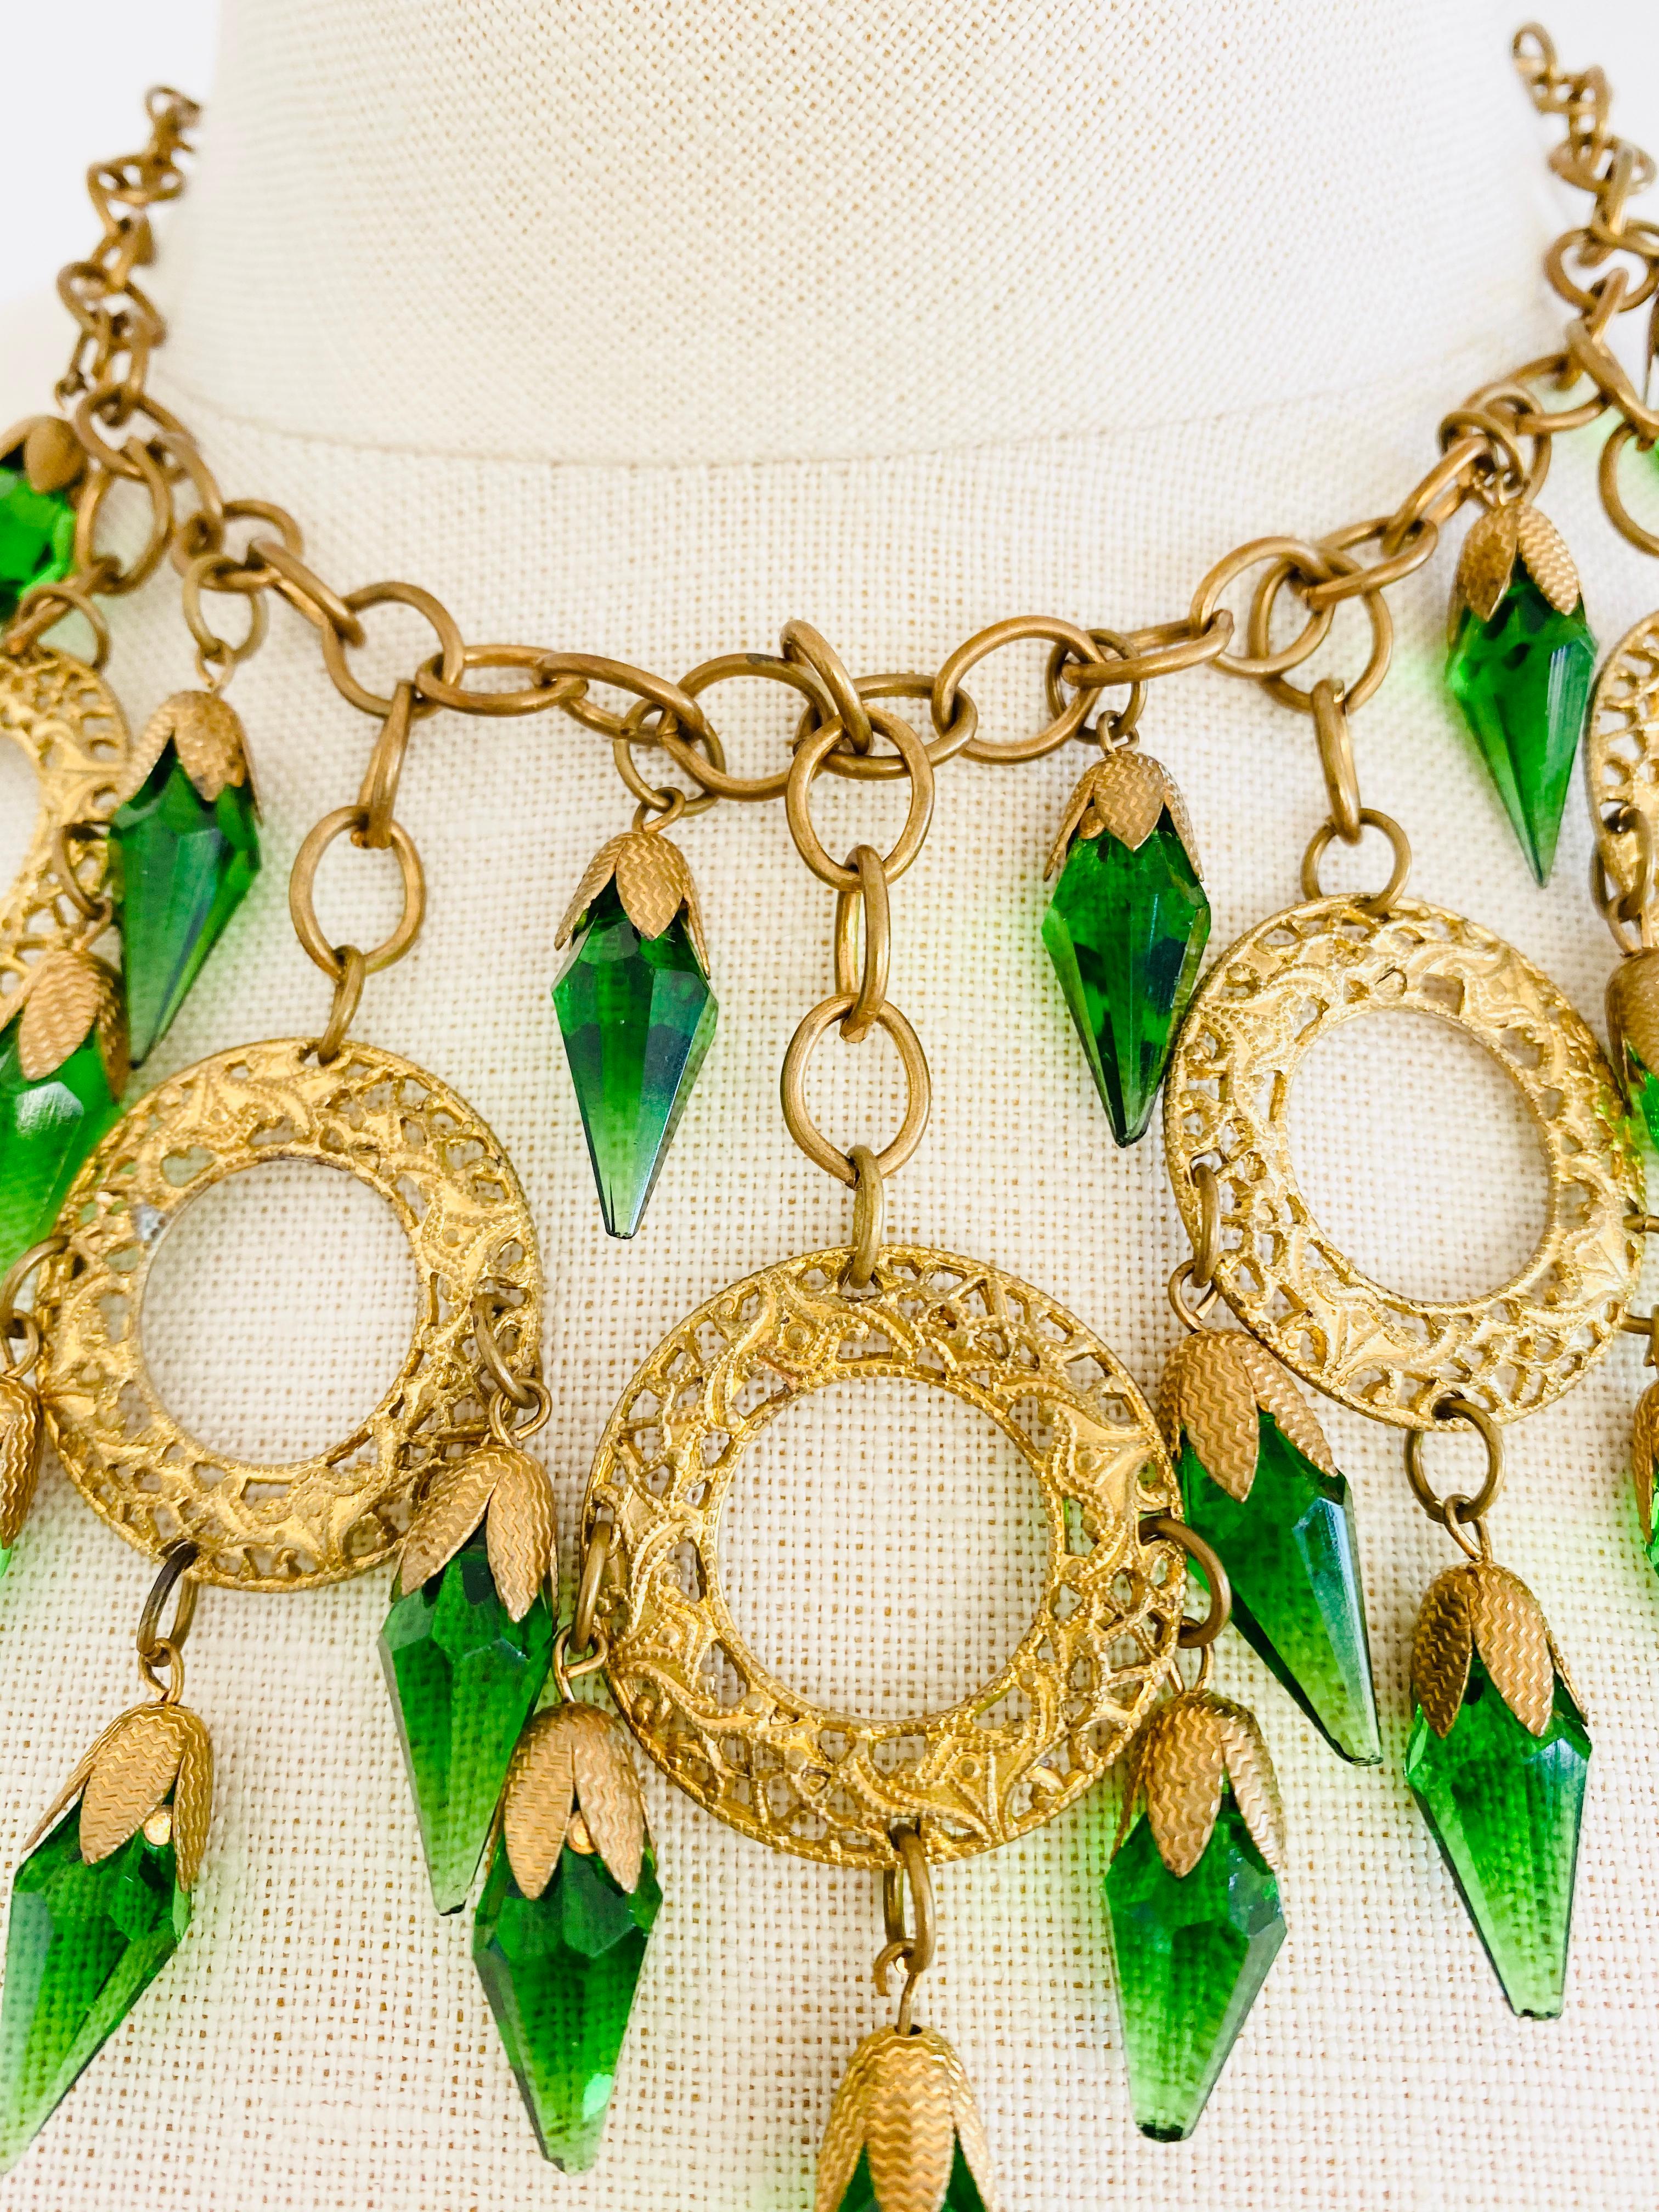 Vintage Bohemian necklace featuring faceted green glass and brass or gold plated metalwork. 

Size: The necklace measures 16